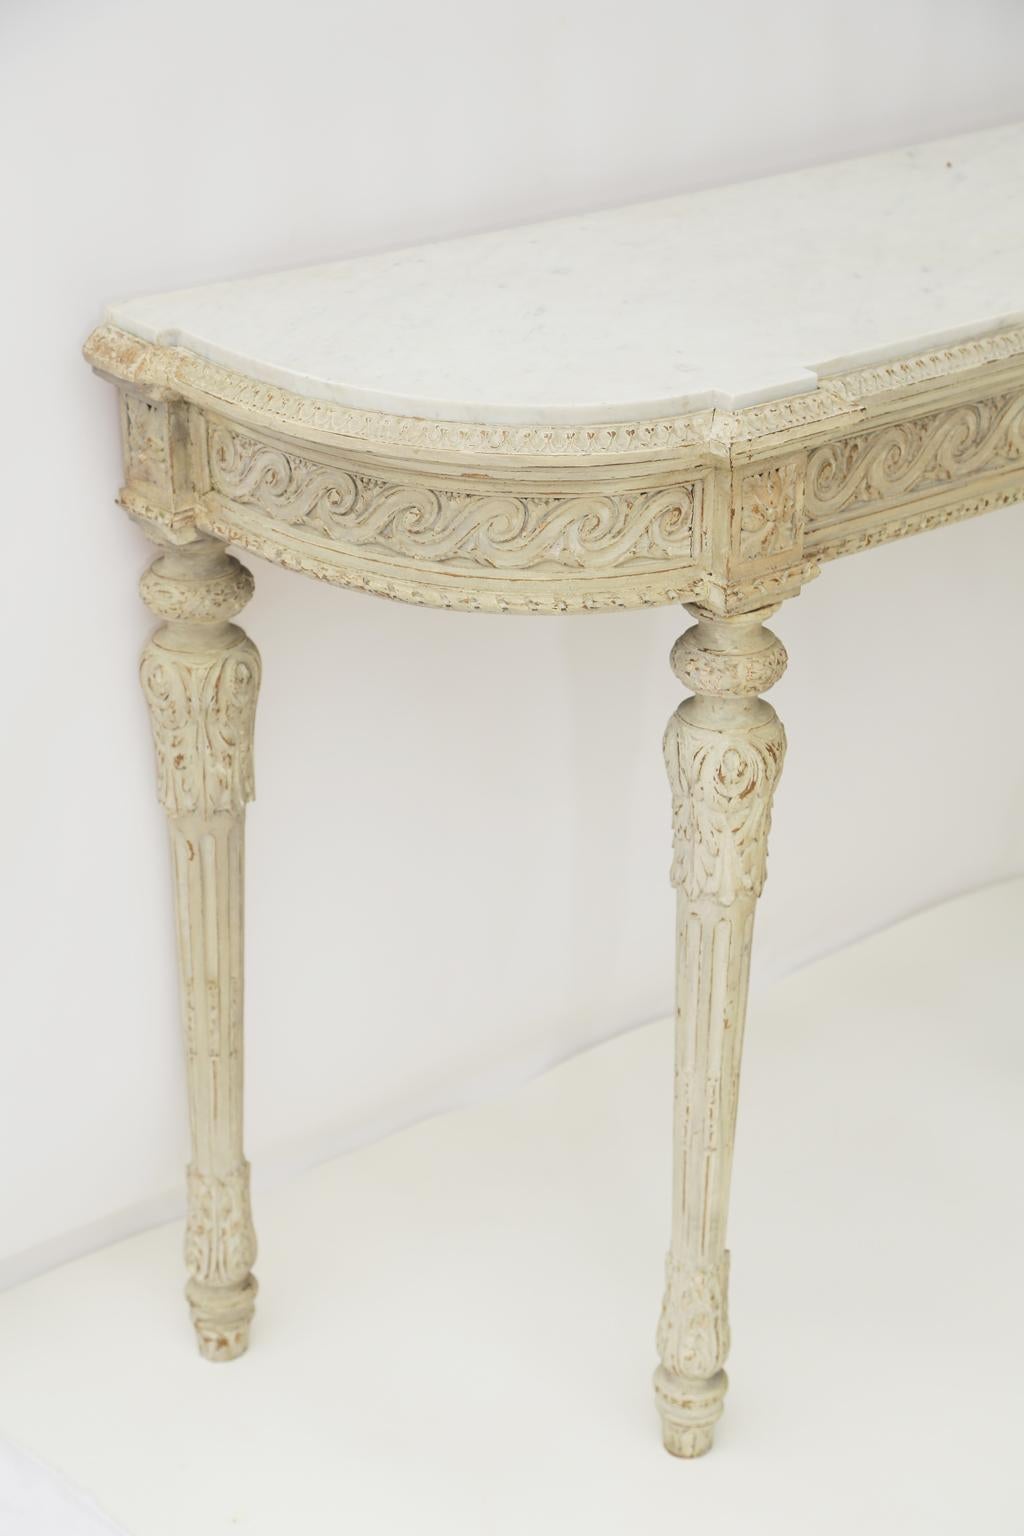 Hand-Carved Carved and Painted 19th Century Belgian Console Table with Carrara Marble Top For Sale